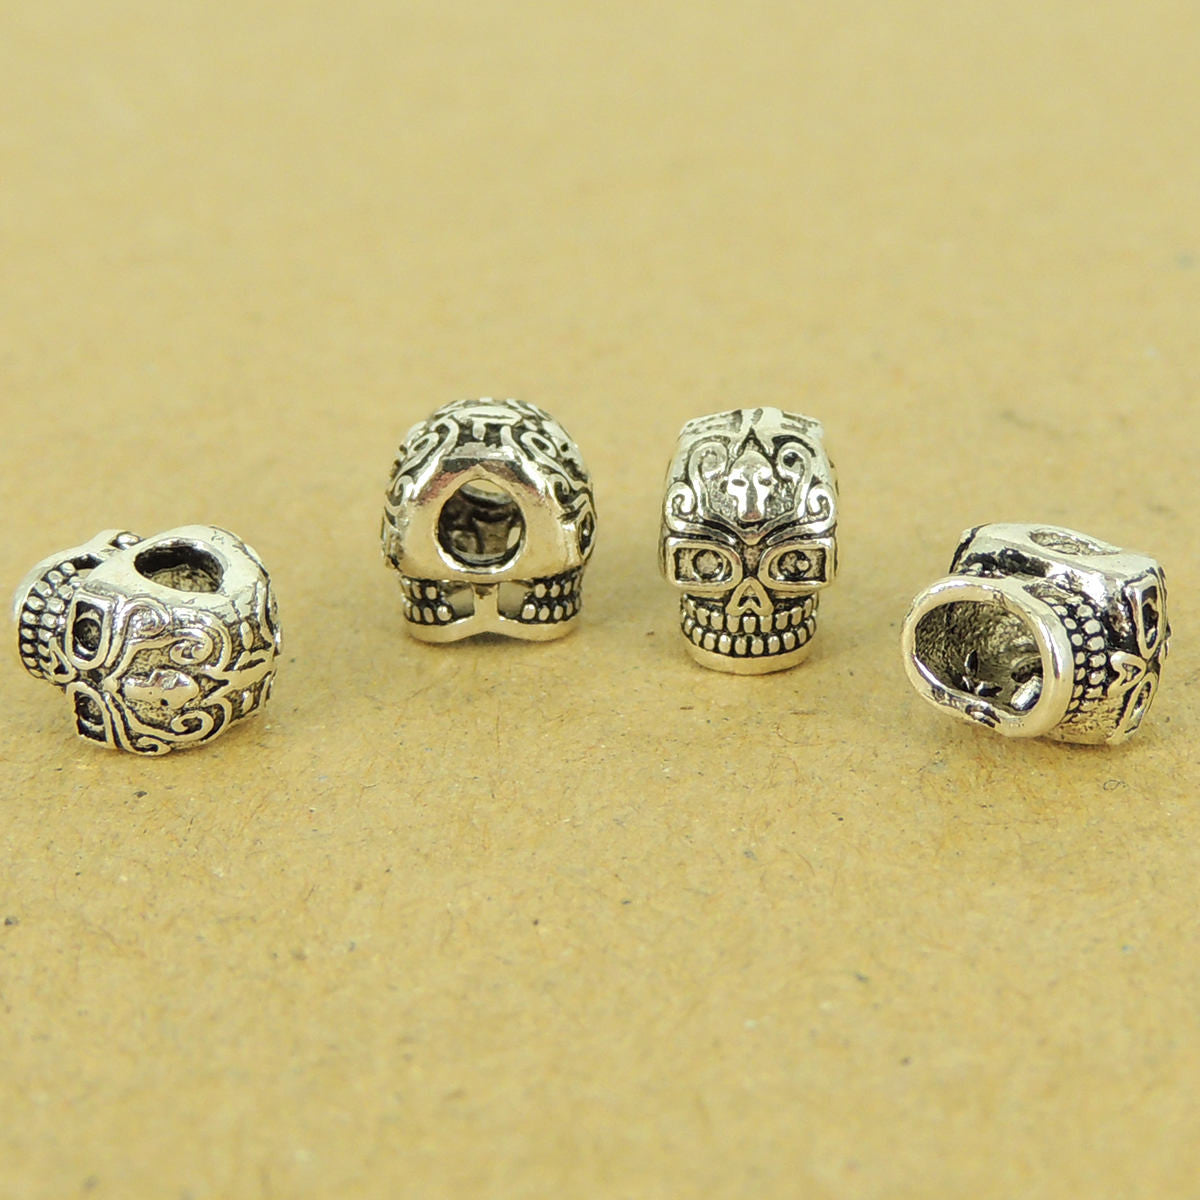 4 PCS Day of the Dead Inspired Skull Beads - Double Sided Design S925 Sterling Silver - Wholesale by Gem & Silver WSP543X4